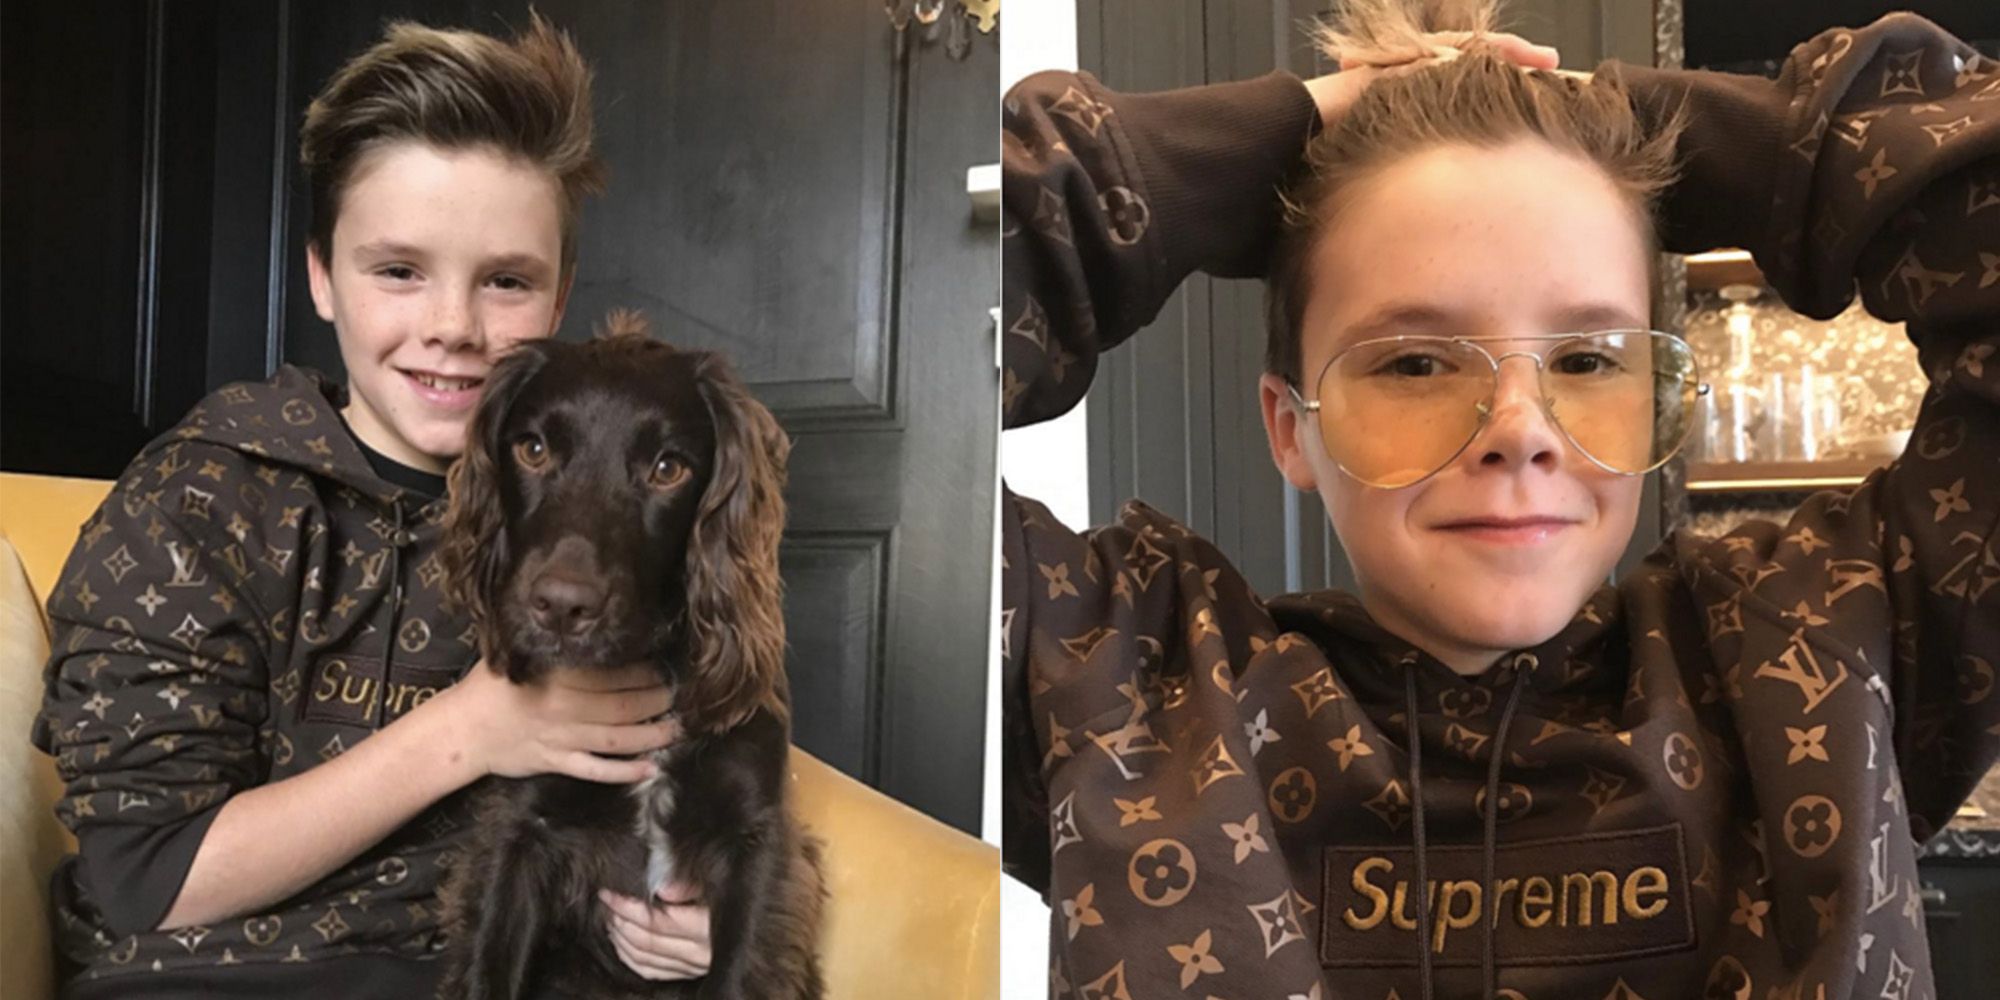 Welcome To The Louis Vuitton x Supreme Squad, Cruz Beckham  Louis vuitton  supreme, Louis vuitton hoodie, Luis vuitton